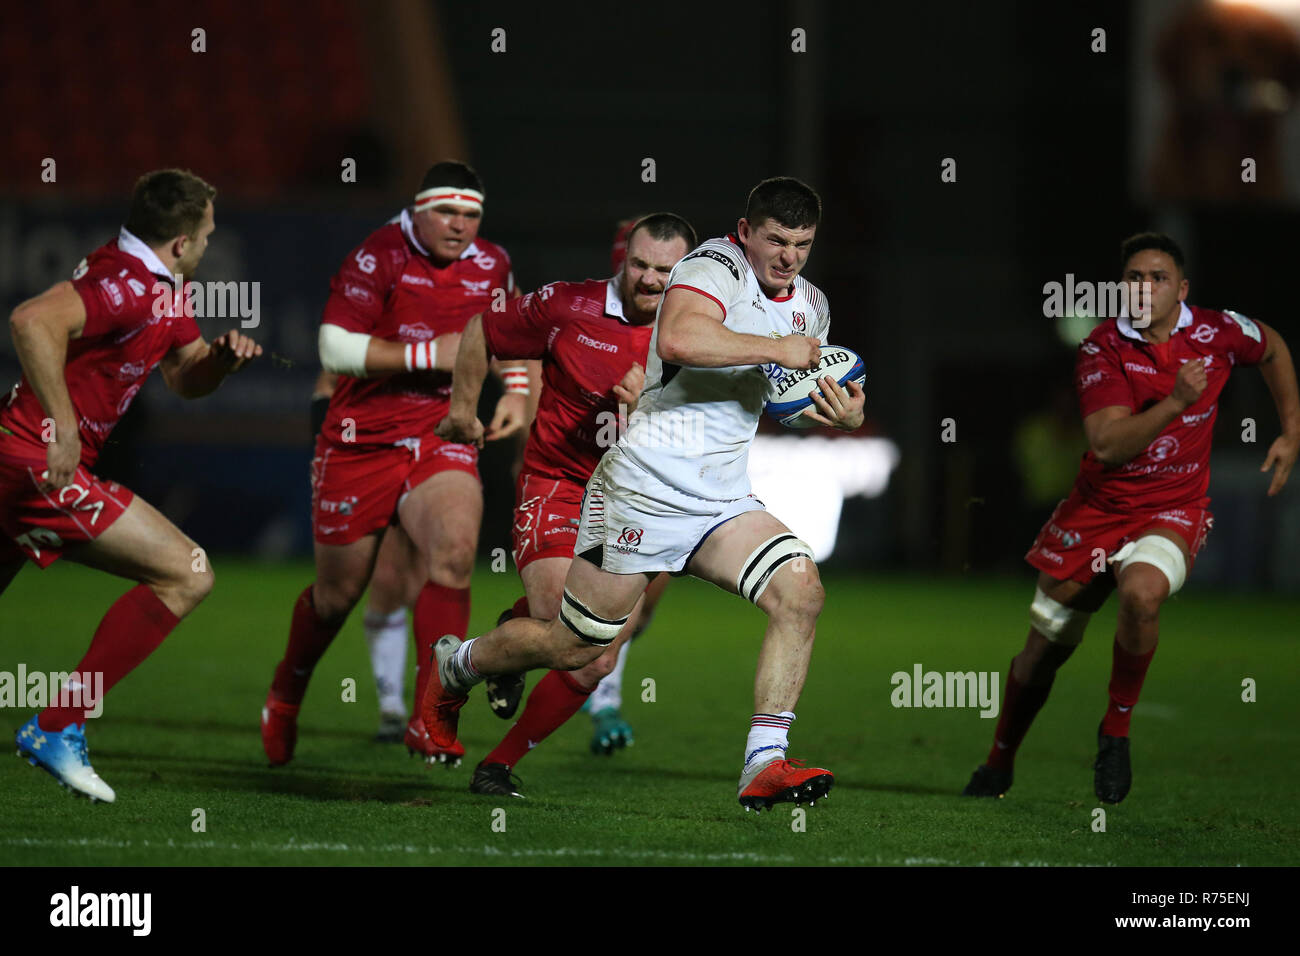 Llanelli, UK. 07th Dec, 2018. Nick Timoney of Ulster rugby Credit: makes a break. Scarlets v Ulster rugby, Heineken European Champions Cup, pool 4 match at Parc y Scarlets in Llanelli, South Wales on Friday 7th December 2018. picture by Andrew Orchard/Andrew Orchard sports photography/Alamy Live News Stock Photo